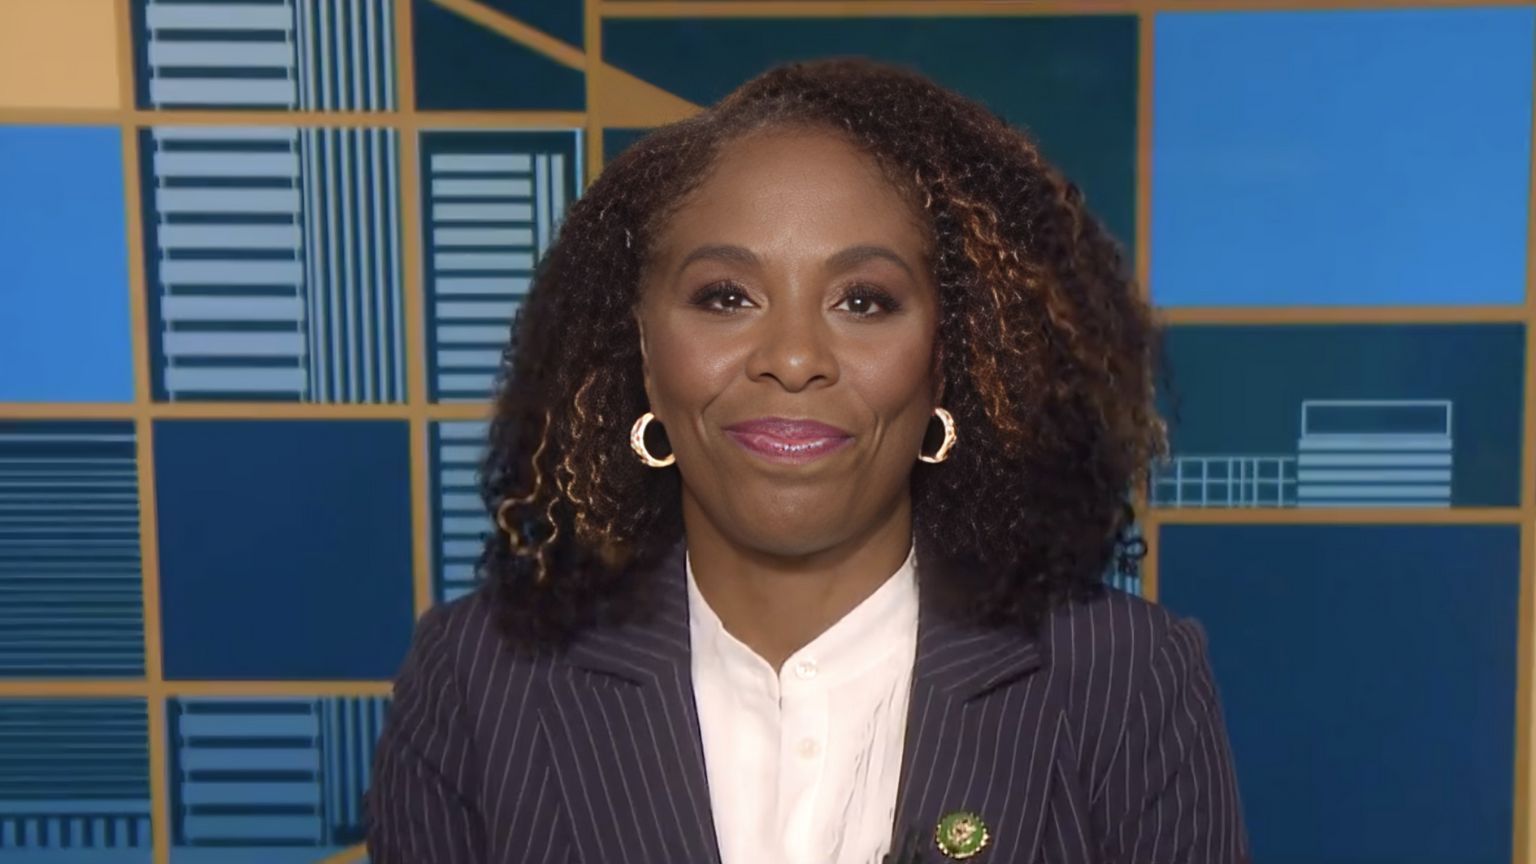 Stacey Plaskett Complains That Allowing RFK Jr. To Speak Will Make The Biden Administration “Hesitant” About Stopping “Misinformation”